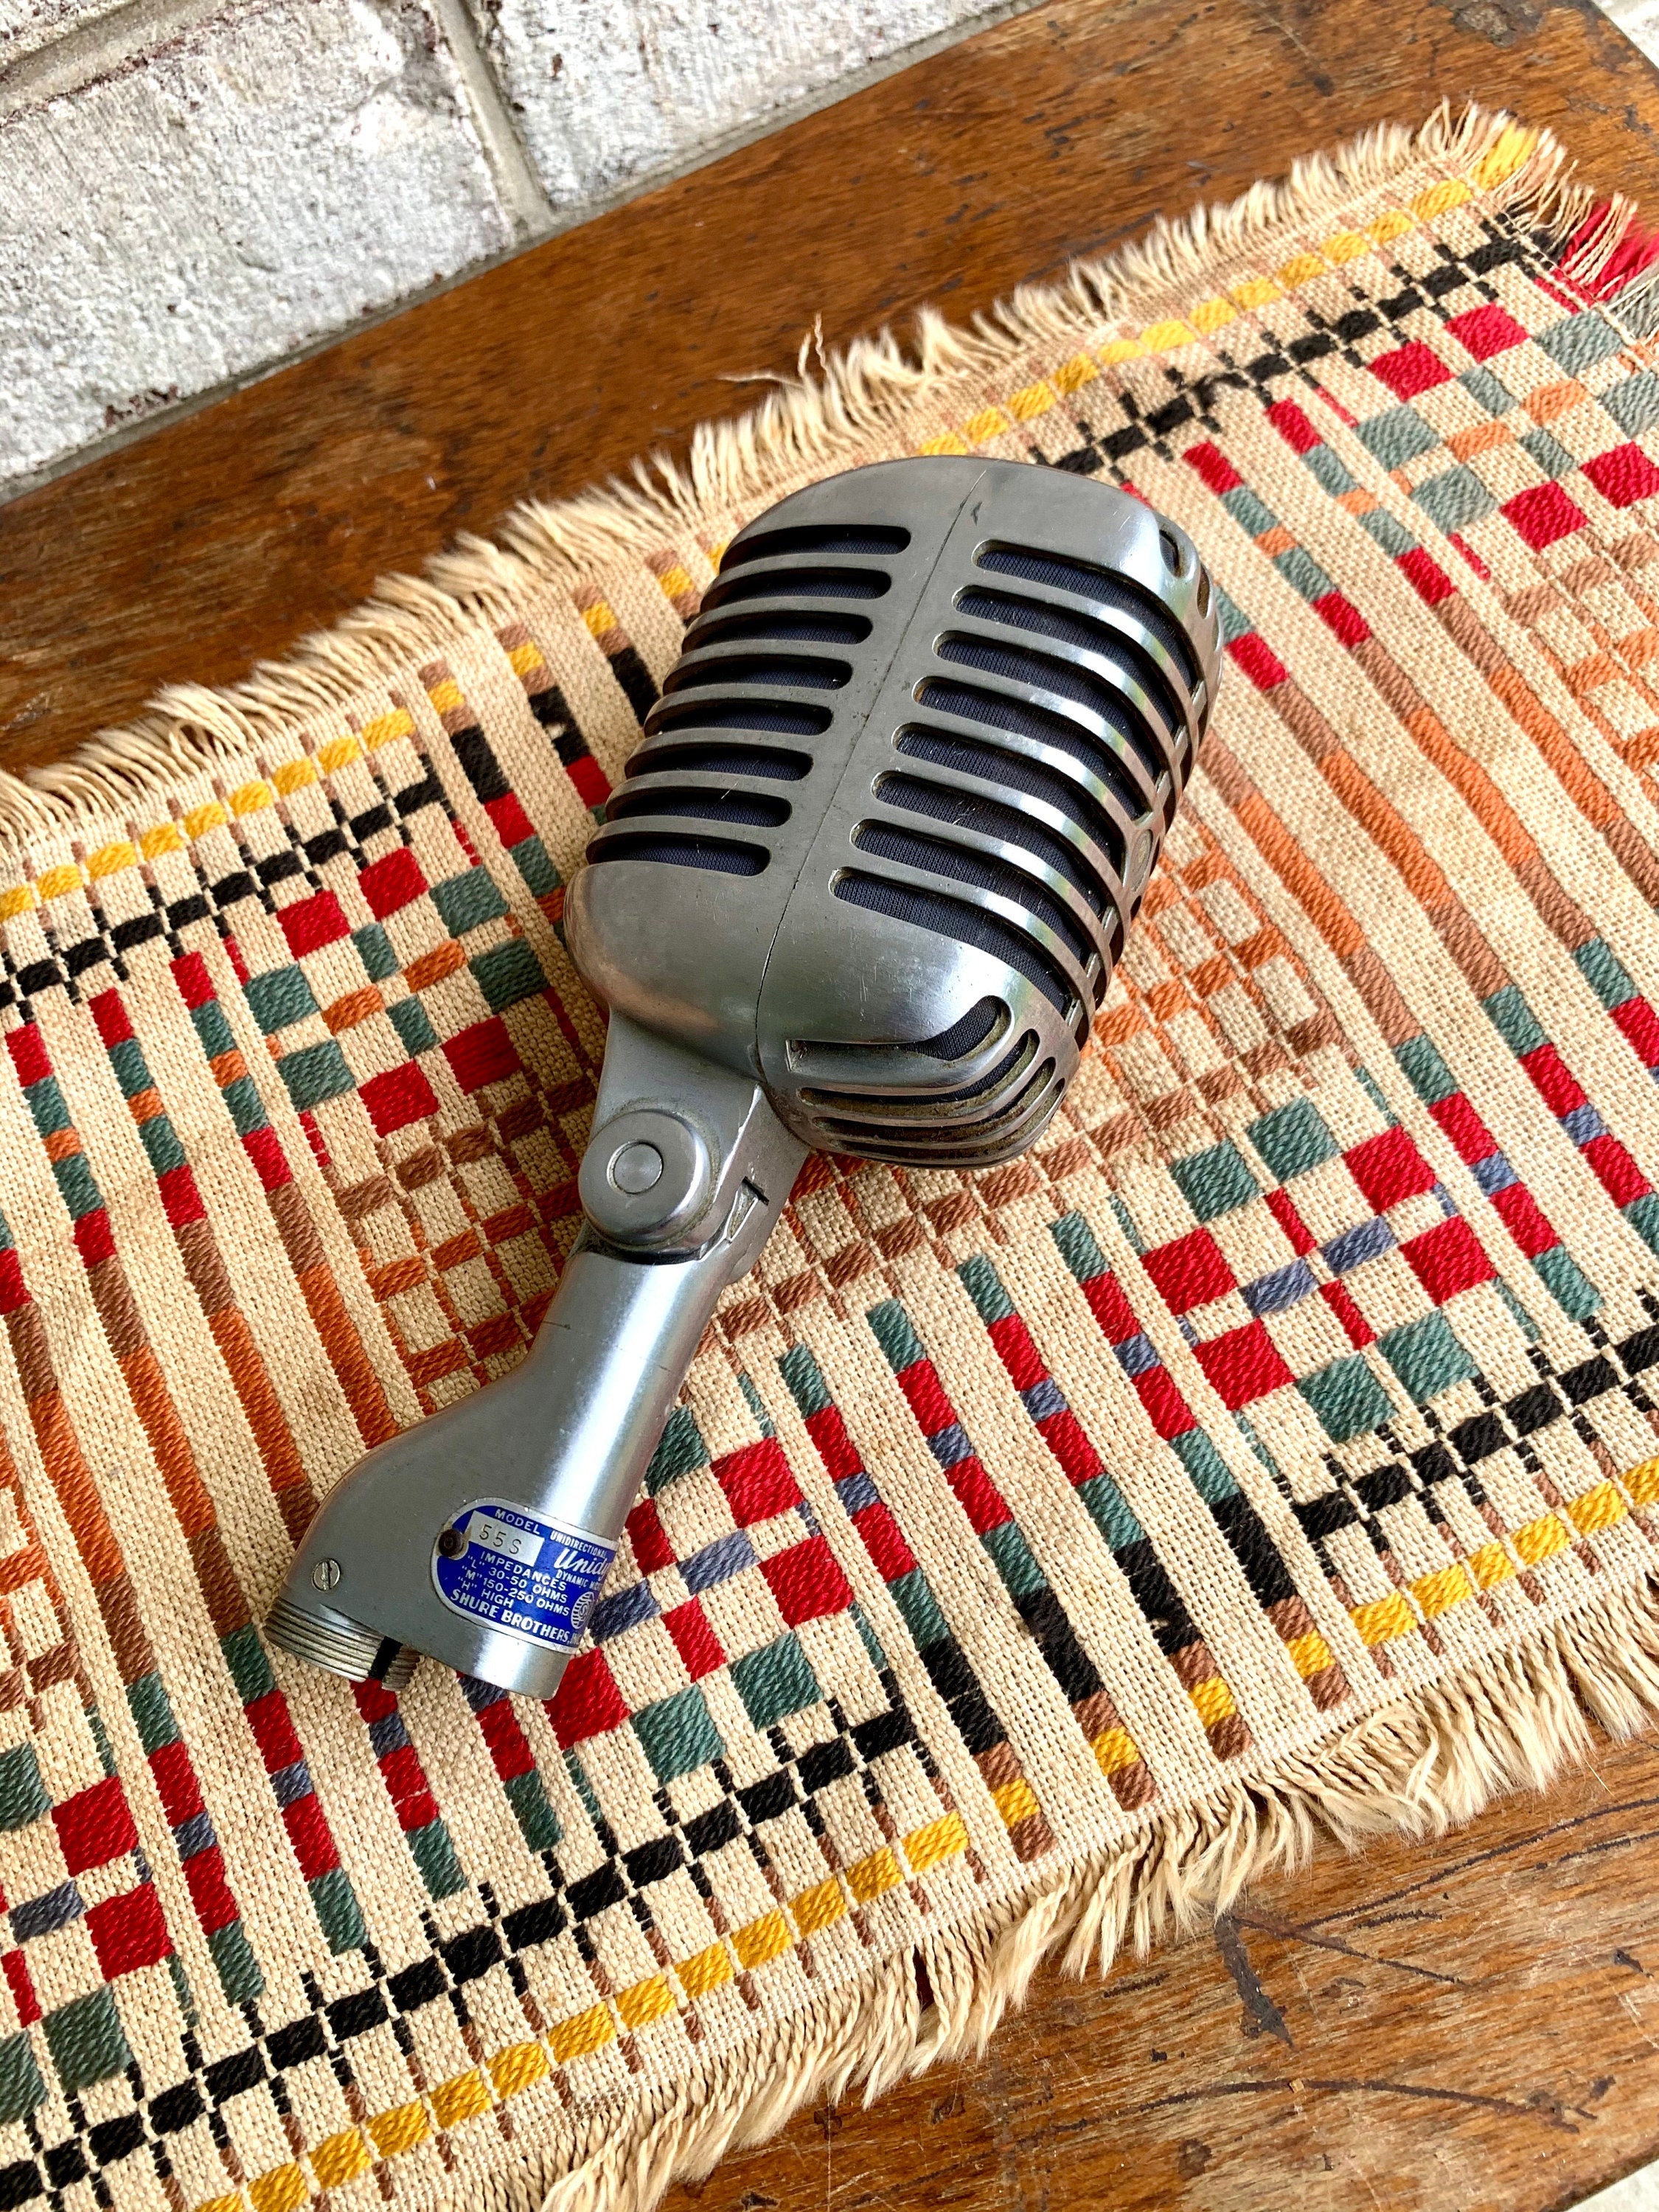 Vintage Shure Brothers Unidyne 55s Microphone Vintage Unidyne 55s Microphone  de microphone Chrome Elvis Microphone -  Canada